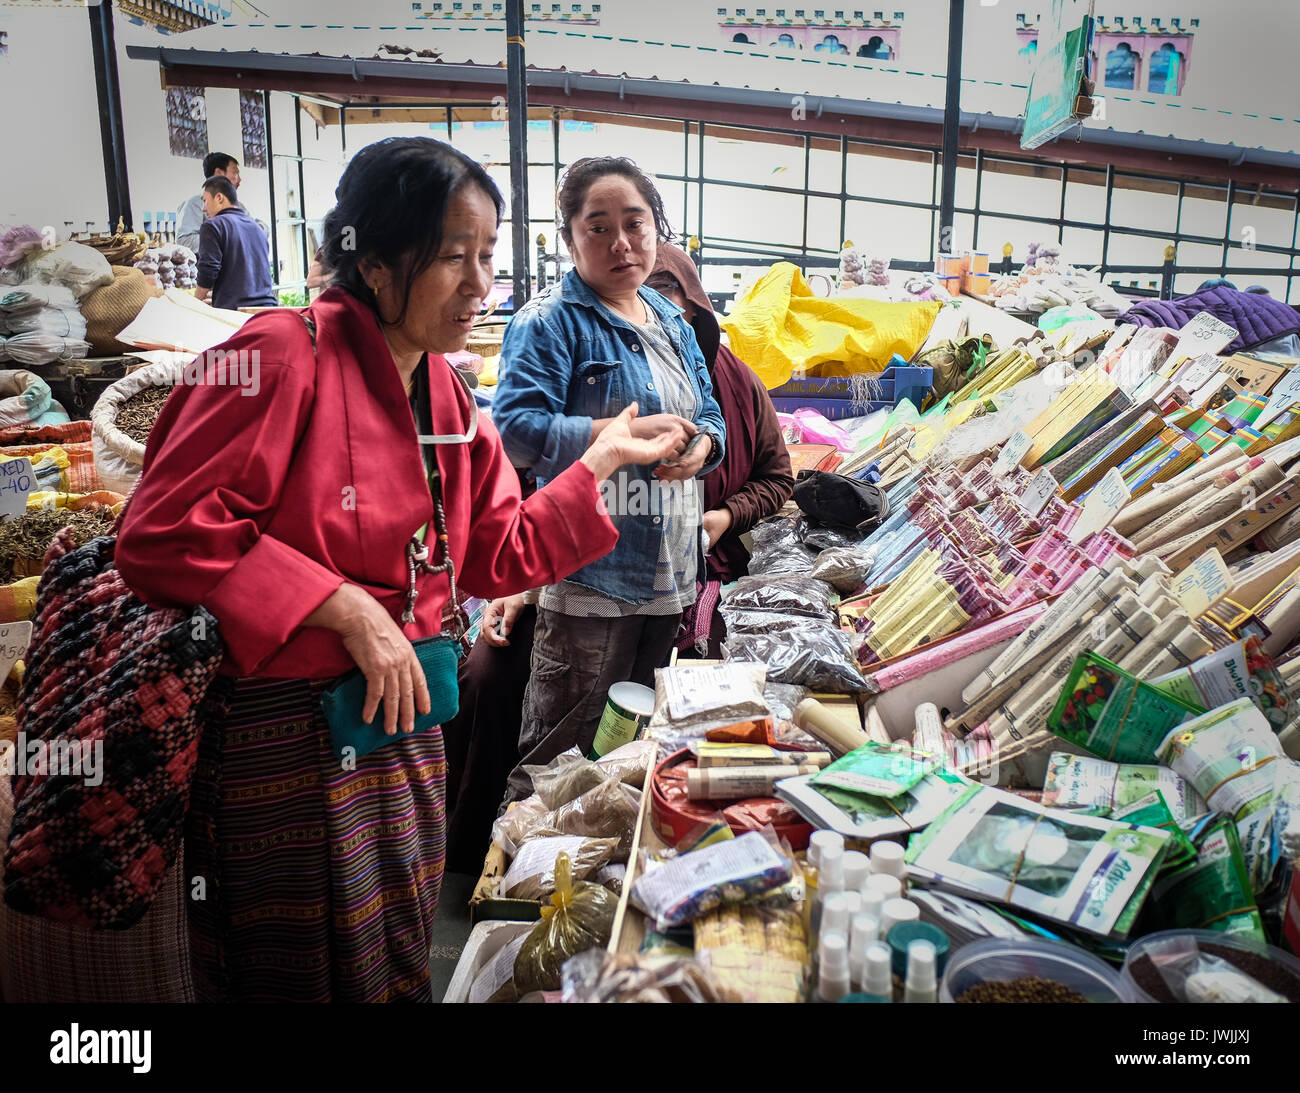 Thimphu, Bhutan - Aug 29, 2015. Vendors at rural market in Thimphu, Bhutan. In South Asia, Bhutan ranks first in economic freedom, ease of doing busin Stock Photo